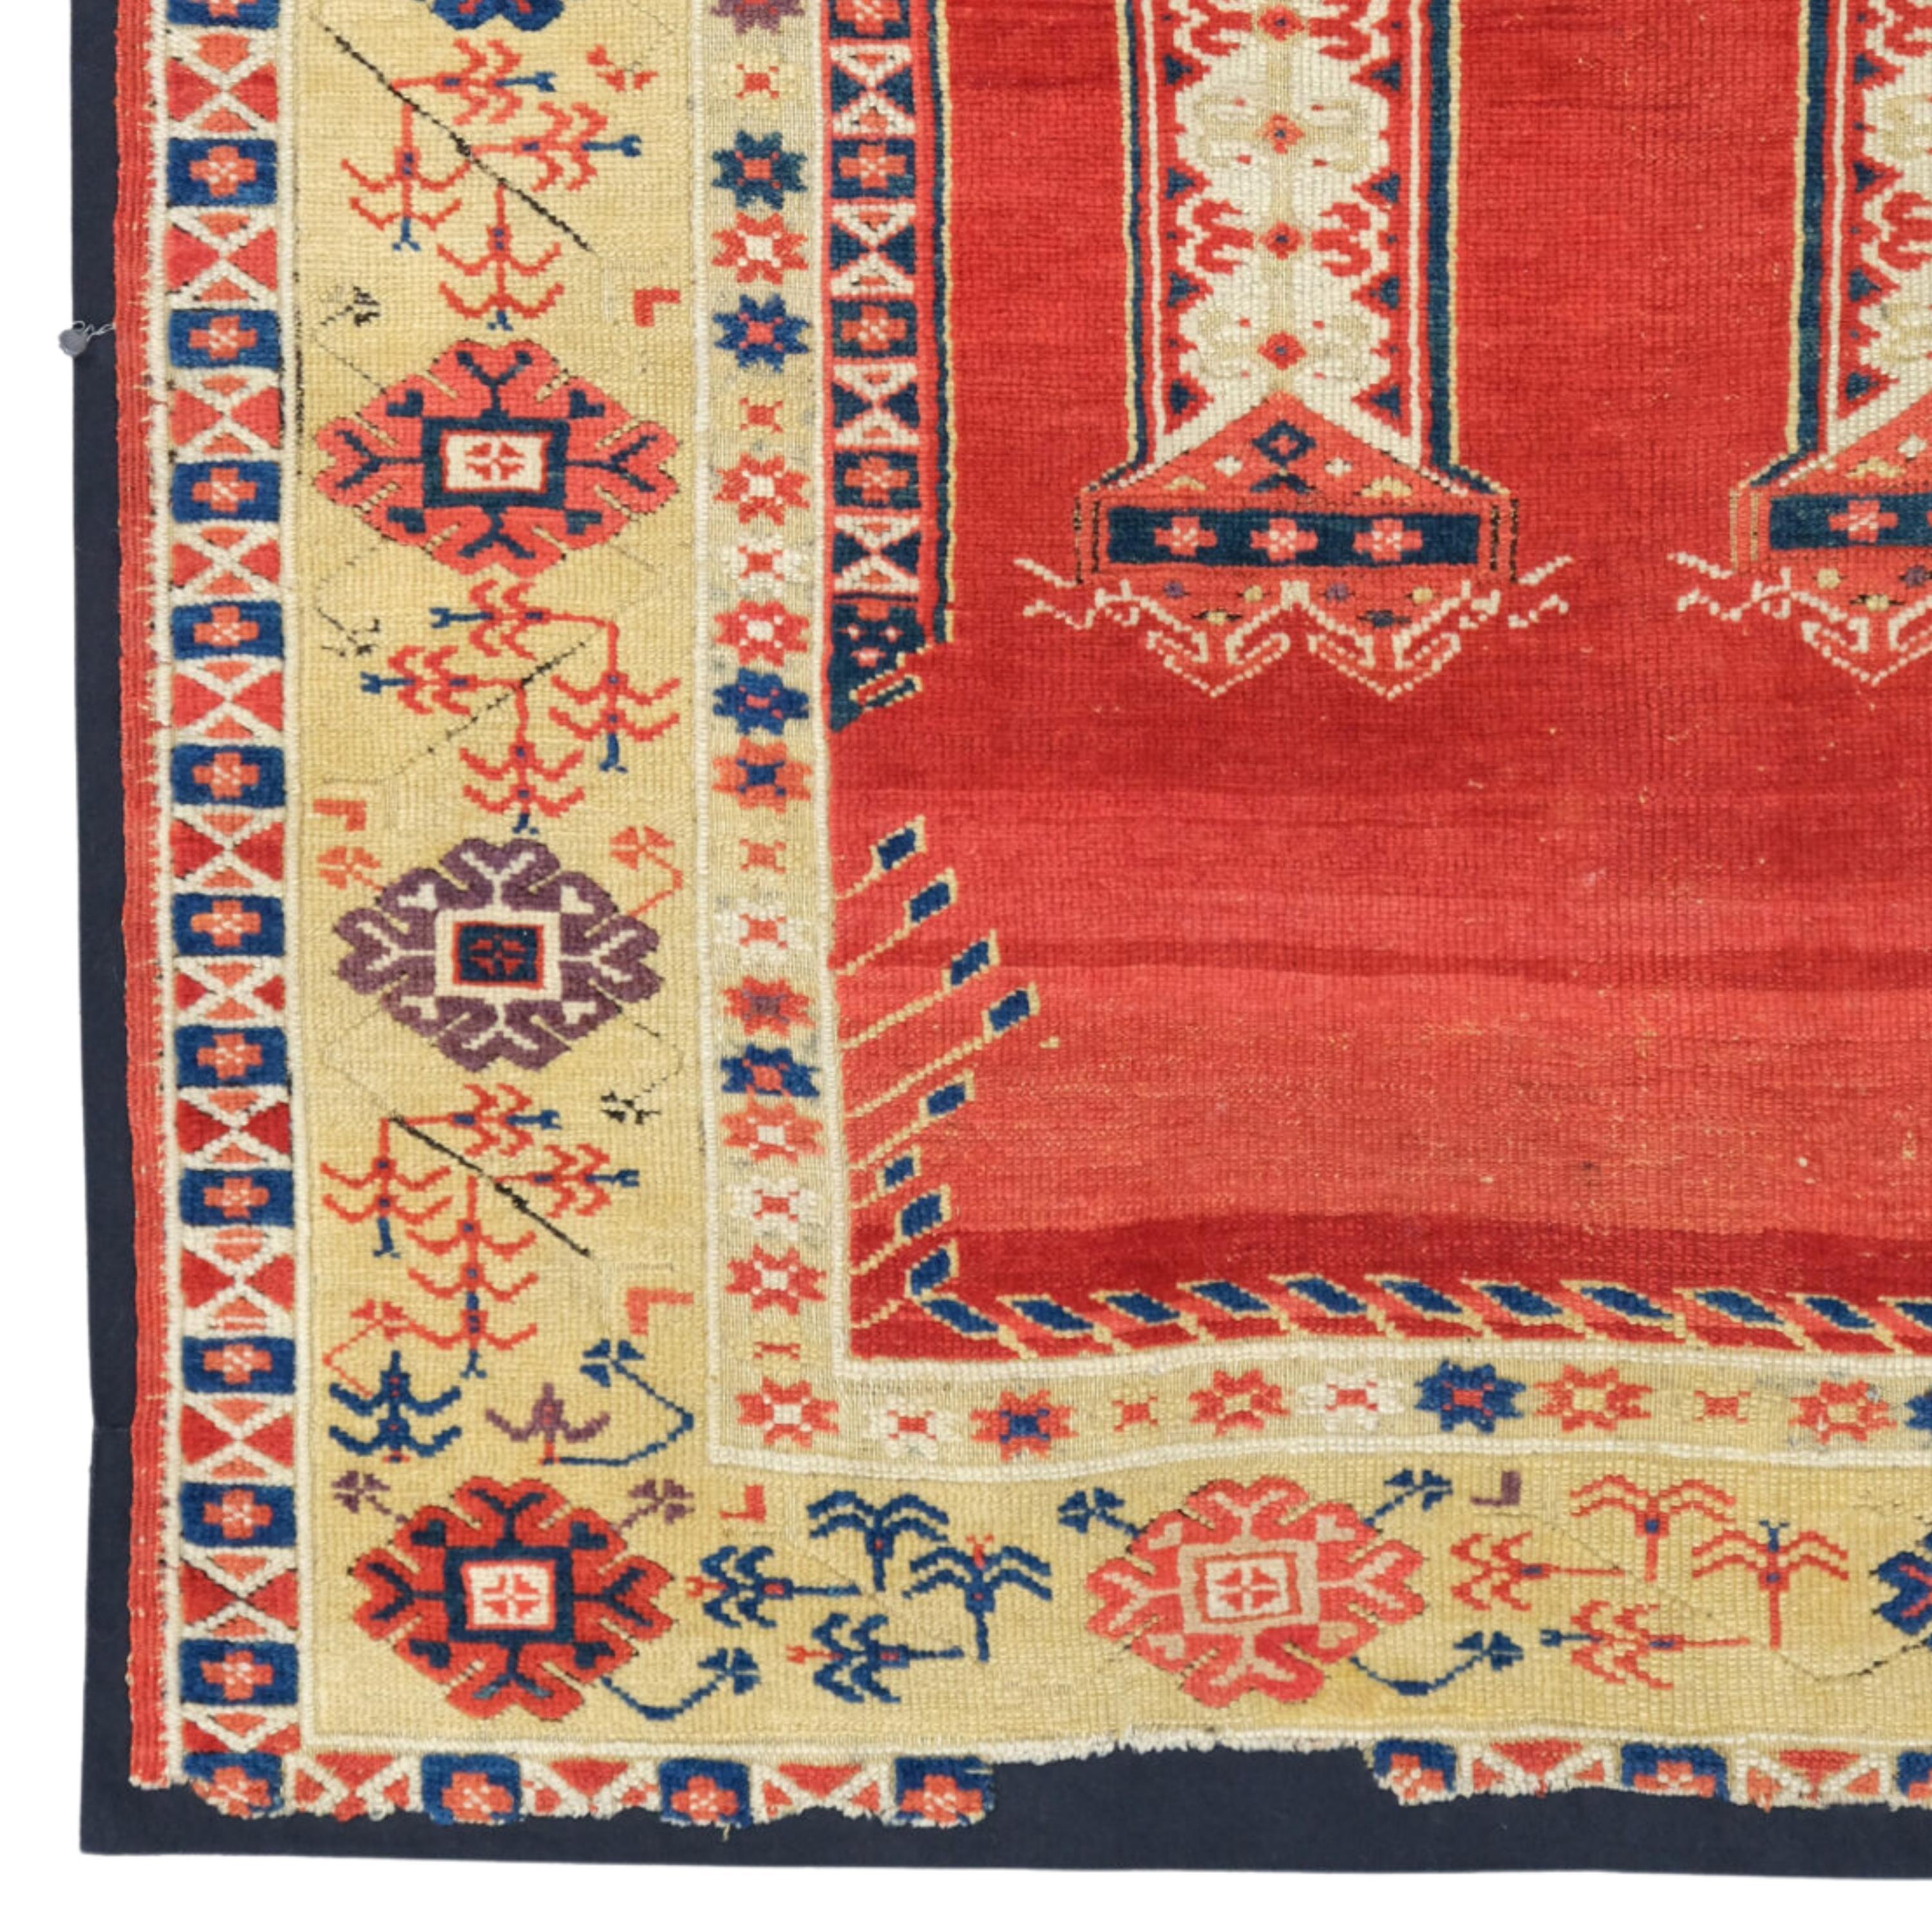 Antique Konya Prayer Rug | Anatolian Rugs
18th Century Central Anatolian Konya Prayer Rug
Size : 115×133 cm (45,2x52,3 In)

More recently rugs from the region have used design motifs widely distributed throughout the country. Notable is a type of